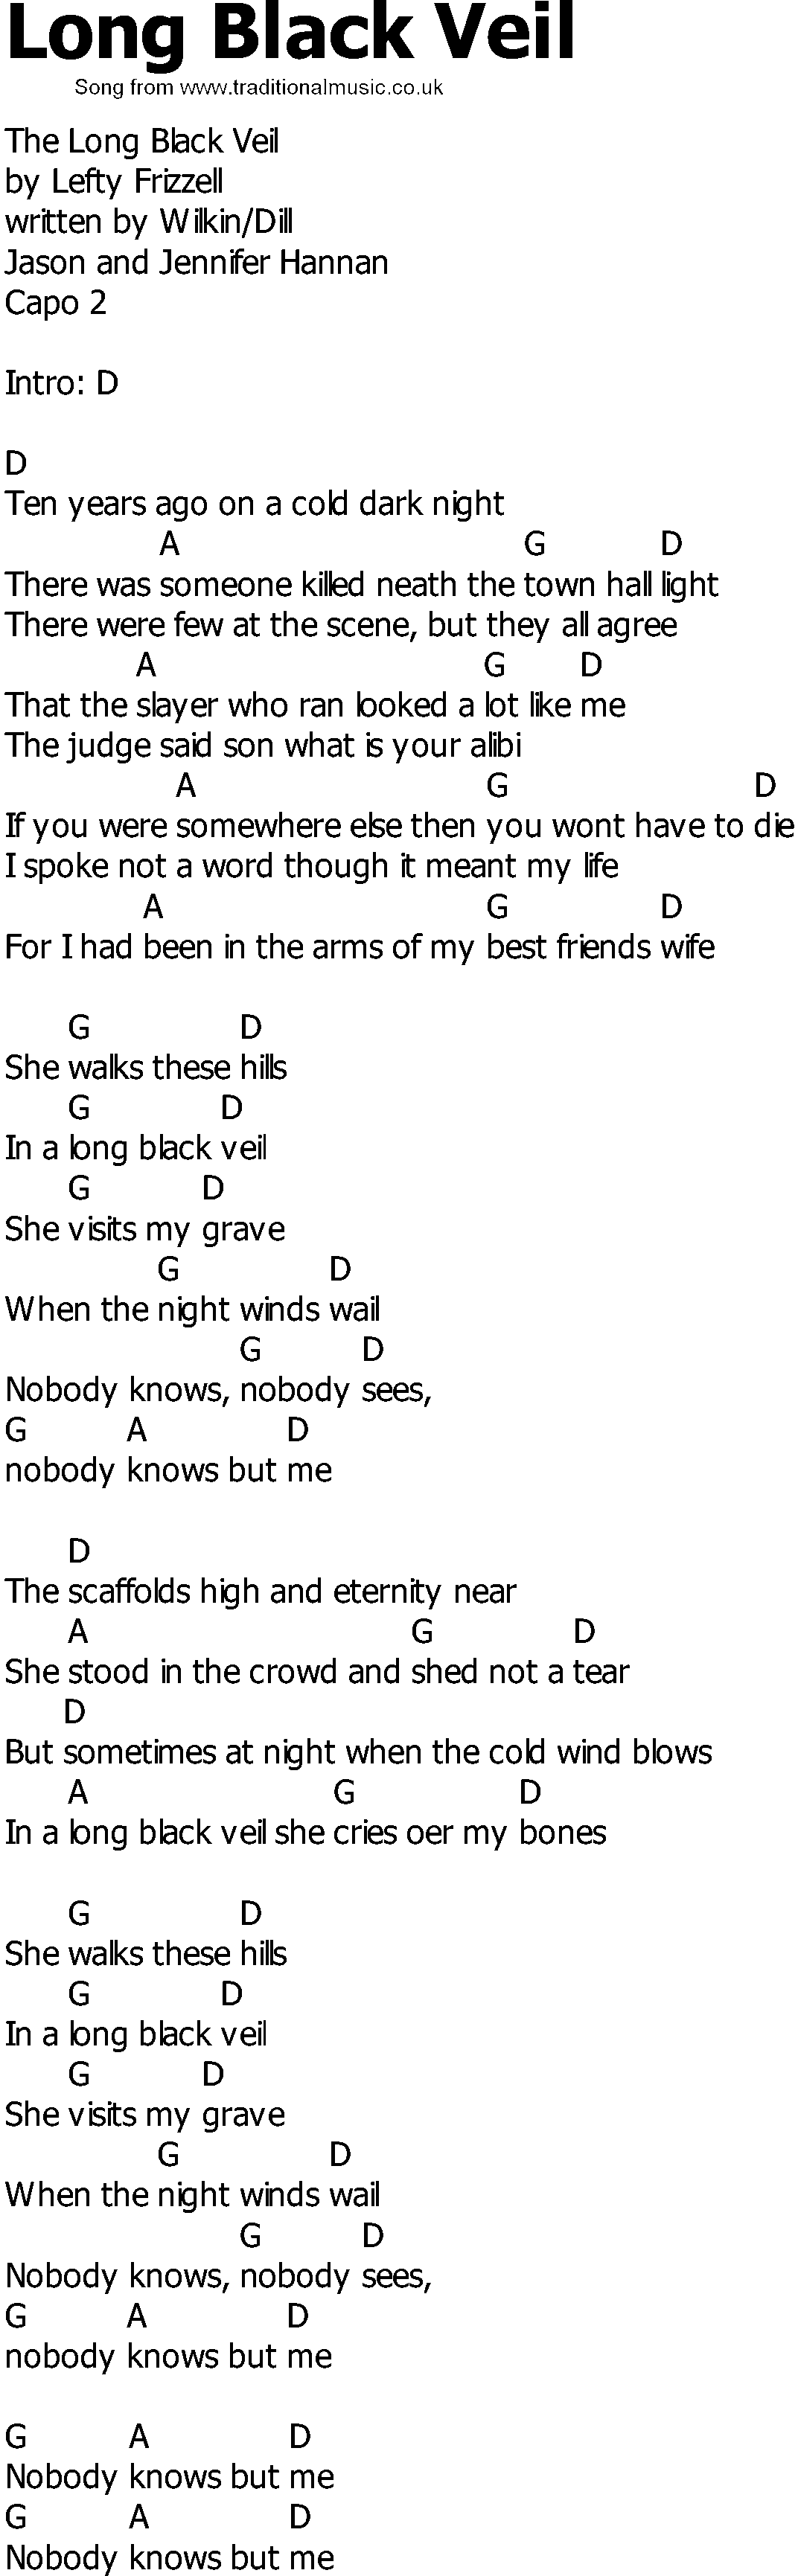 Old Country song lyrics with chords - Long Black Veil